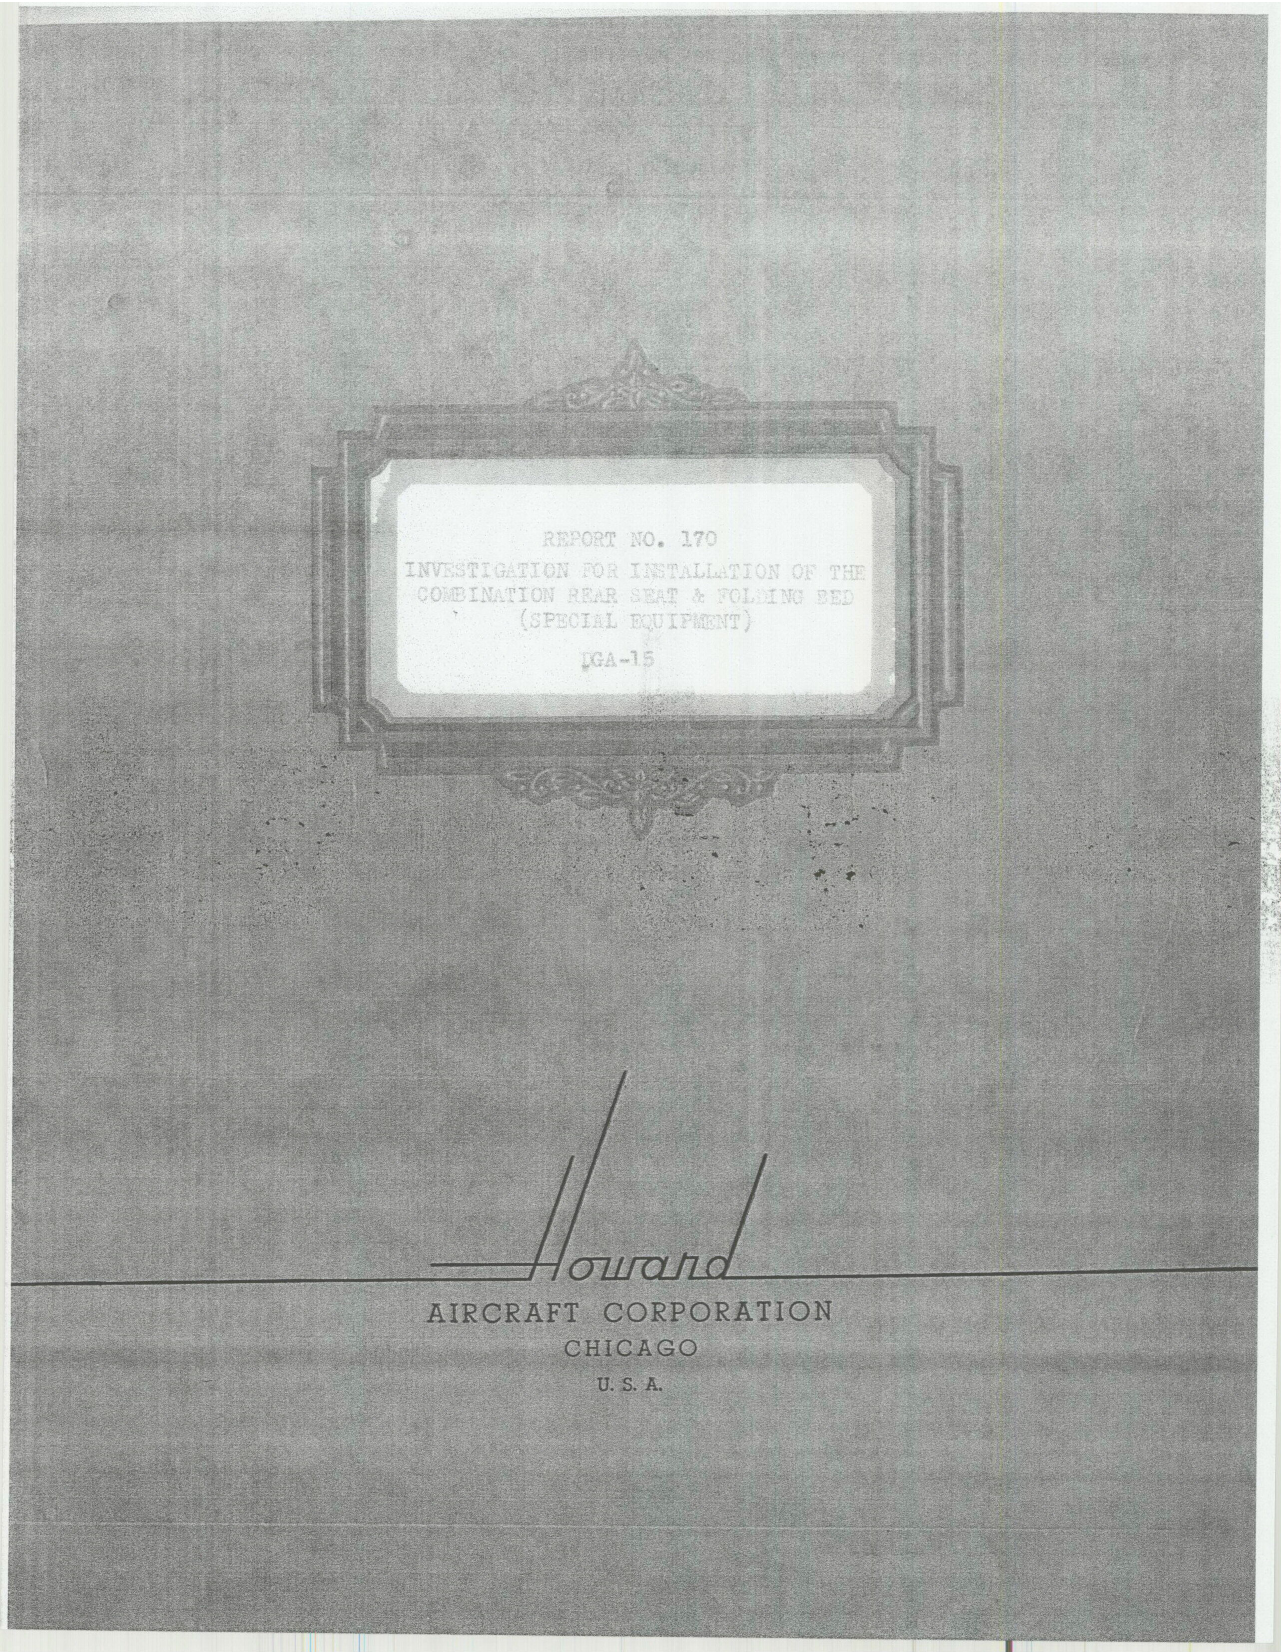 Sample page 1 from AirCorps Library document: Report 170, Investigation for Installation of Bed, DGA-15